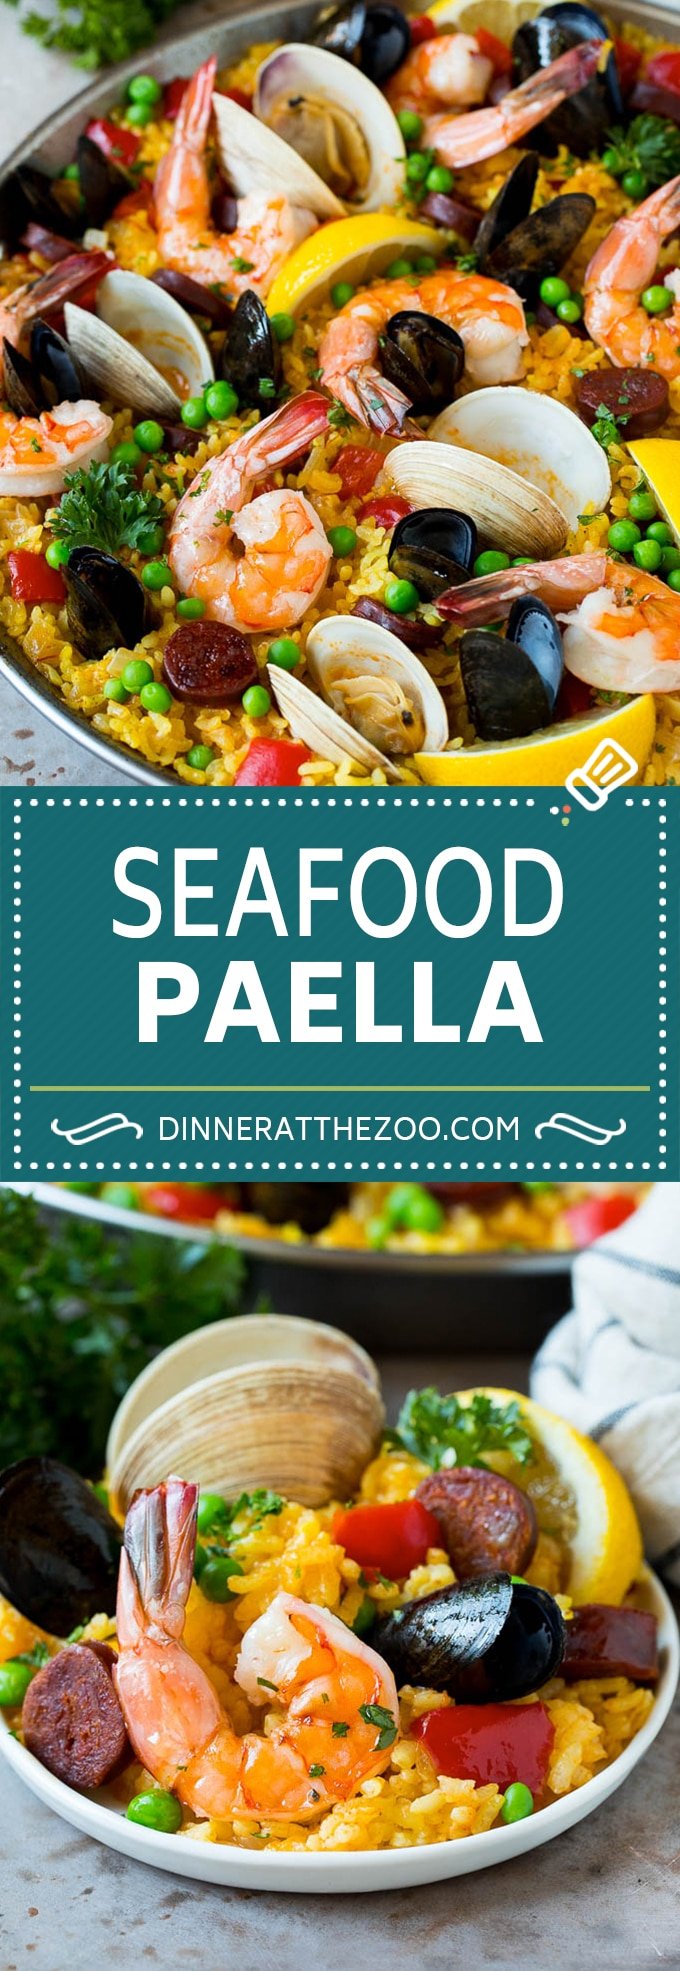 This seafood paella is a blend of saffron rice, Spanish chorizo, shrimp, clams and mussels, all simmered together.